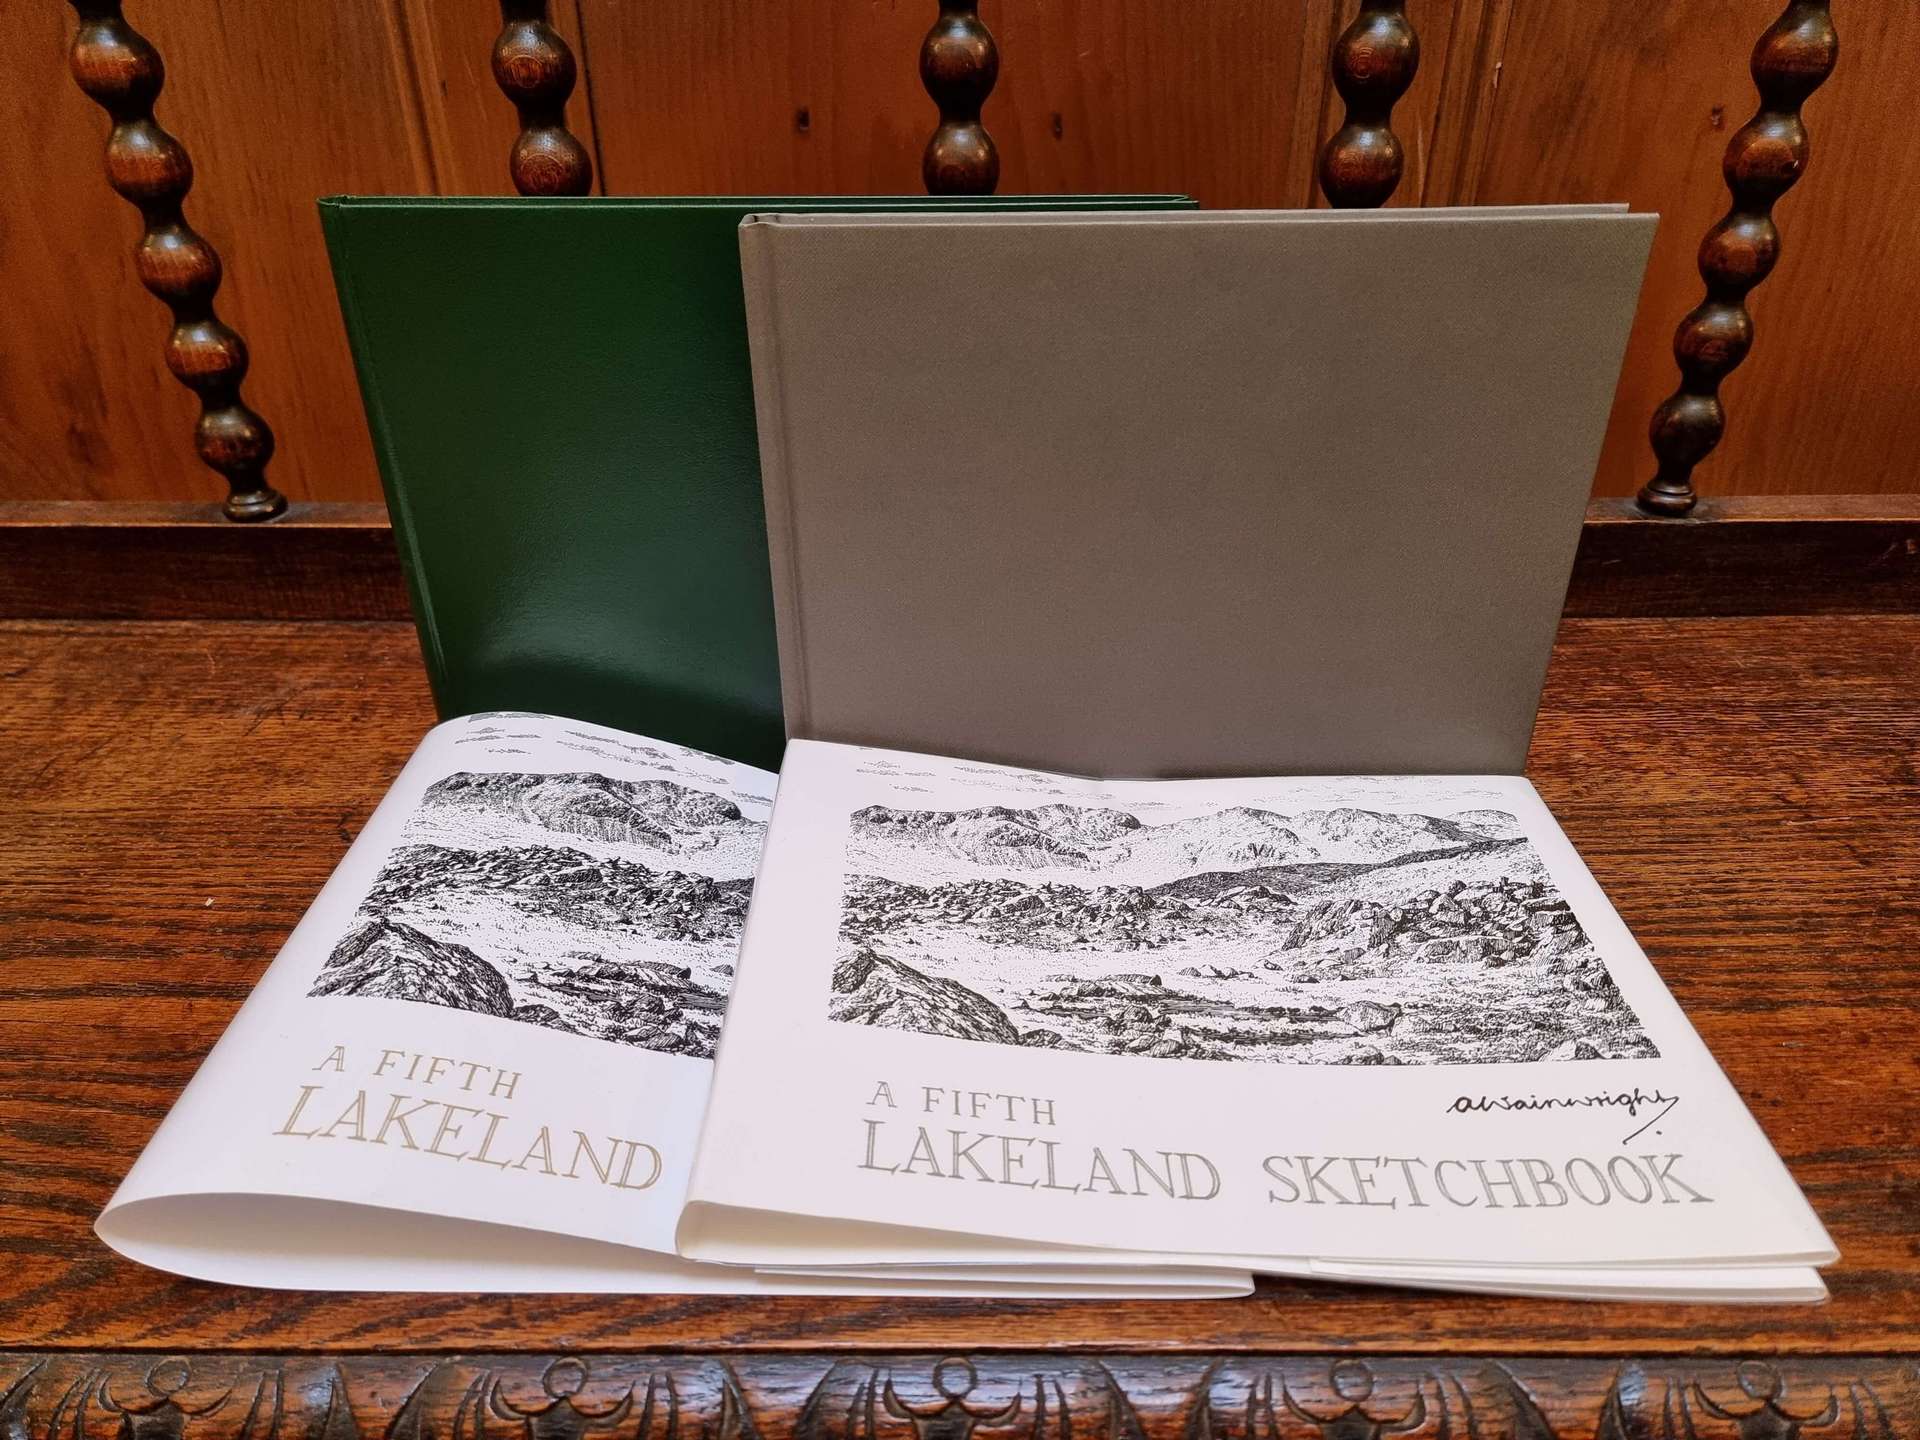 A Fifth Lakeland Sketchbook First Edition Later Prints